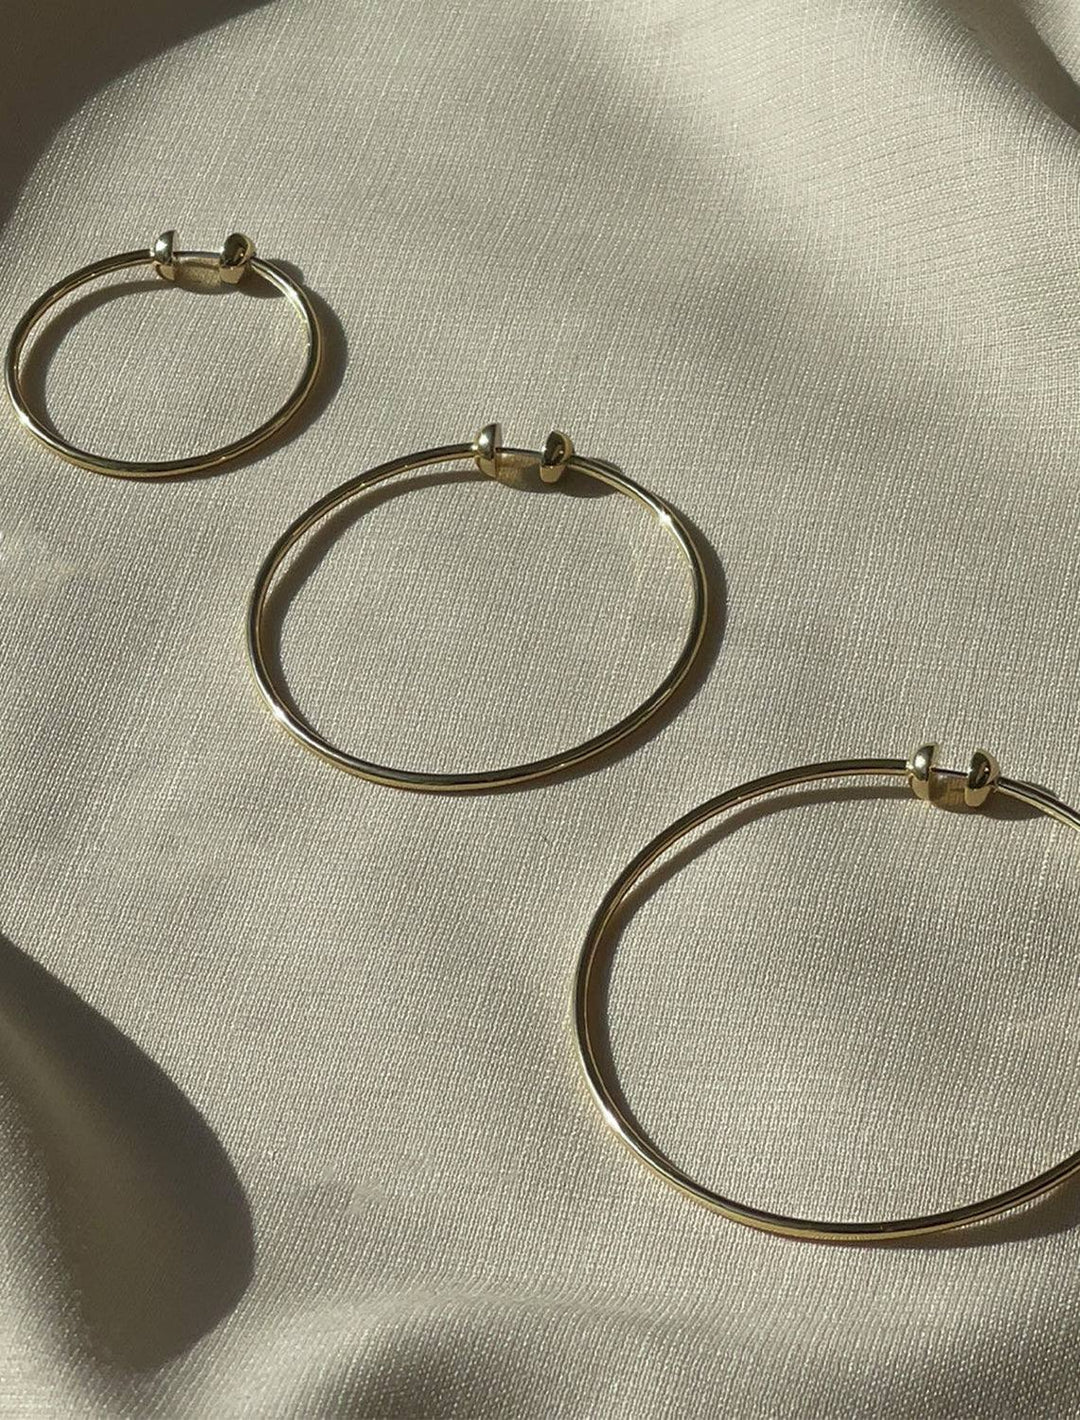 Jenny Bird new icon hoops in gold small - Twigs